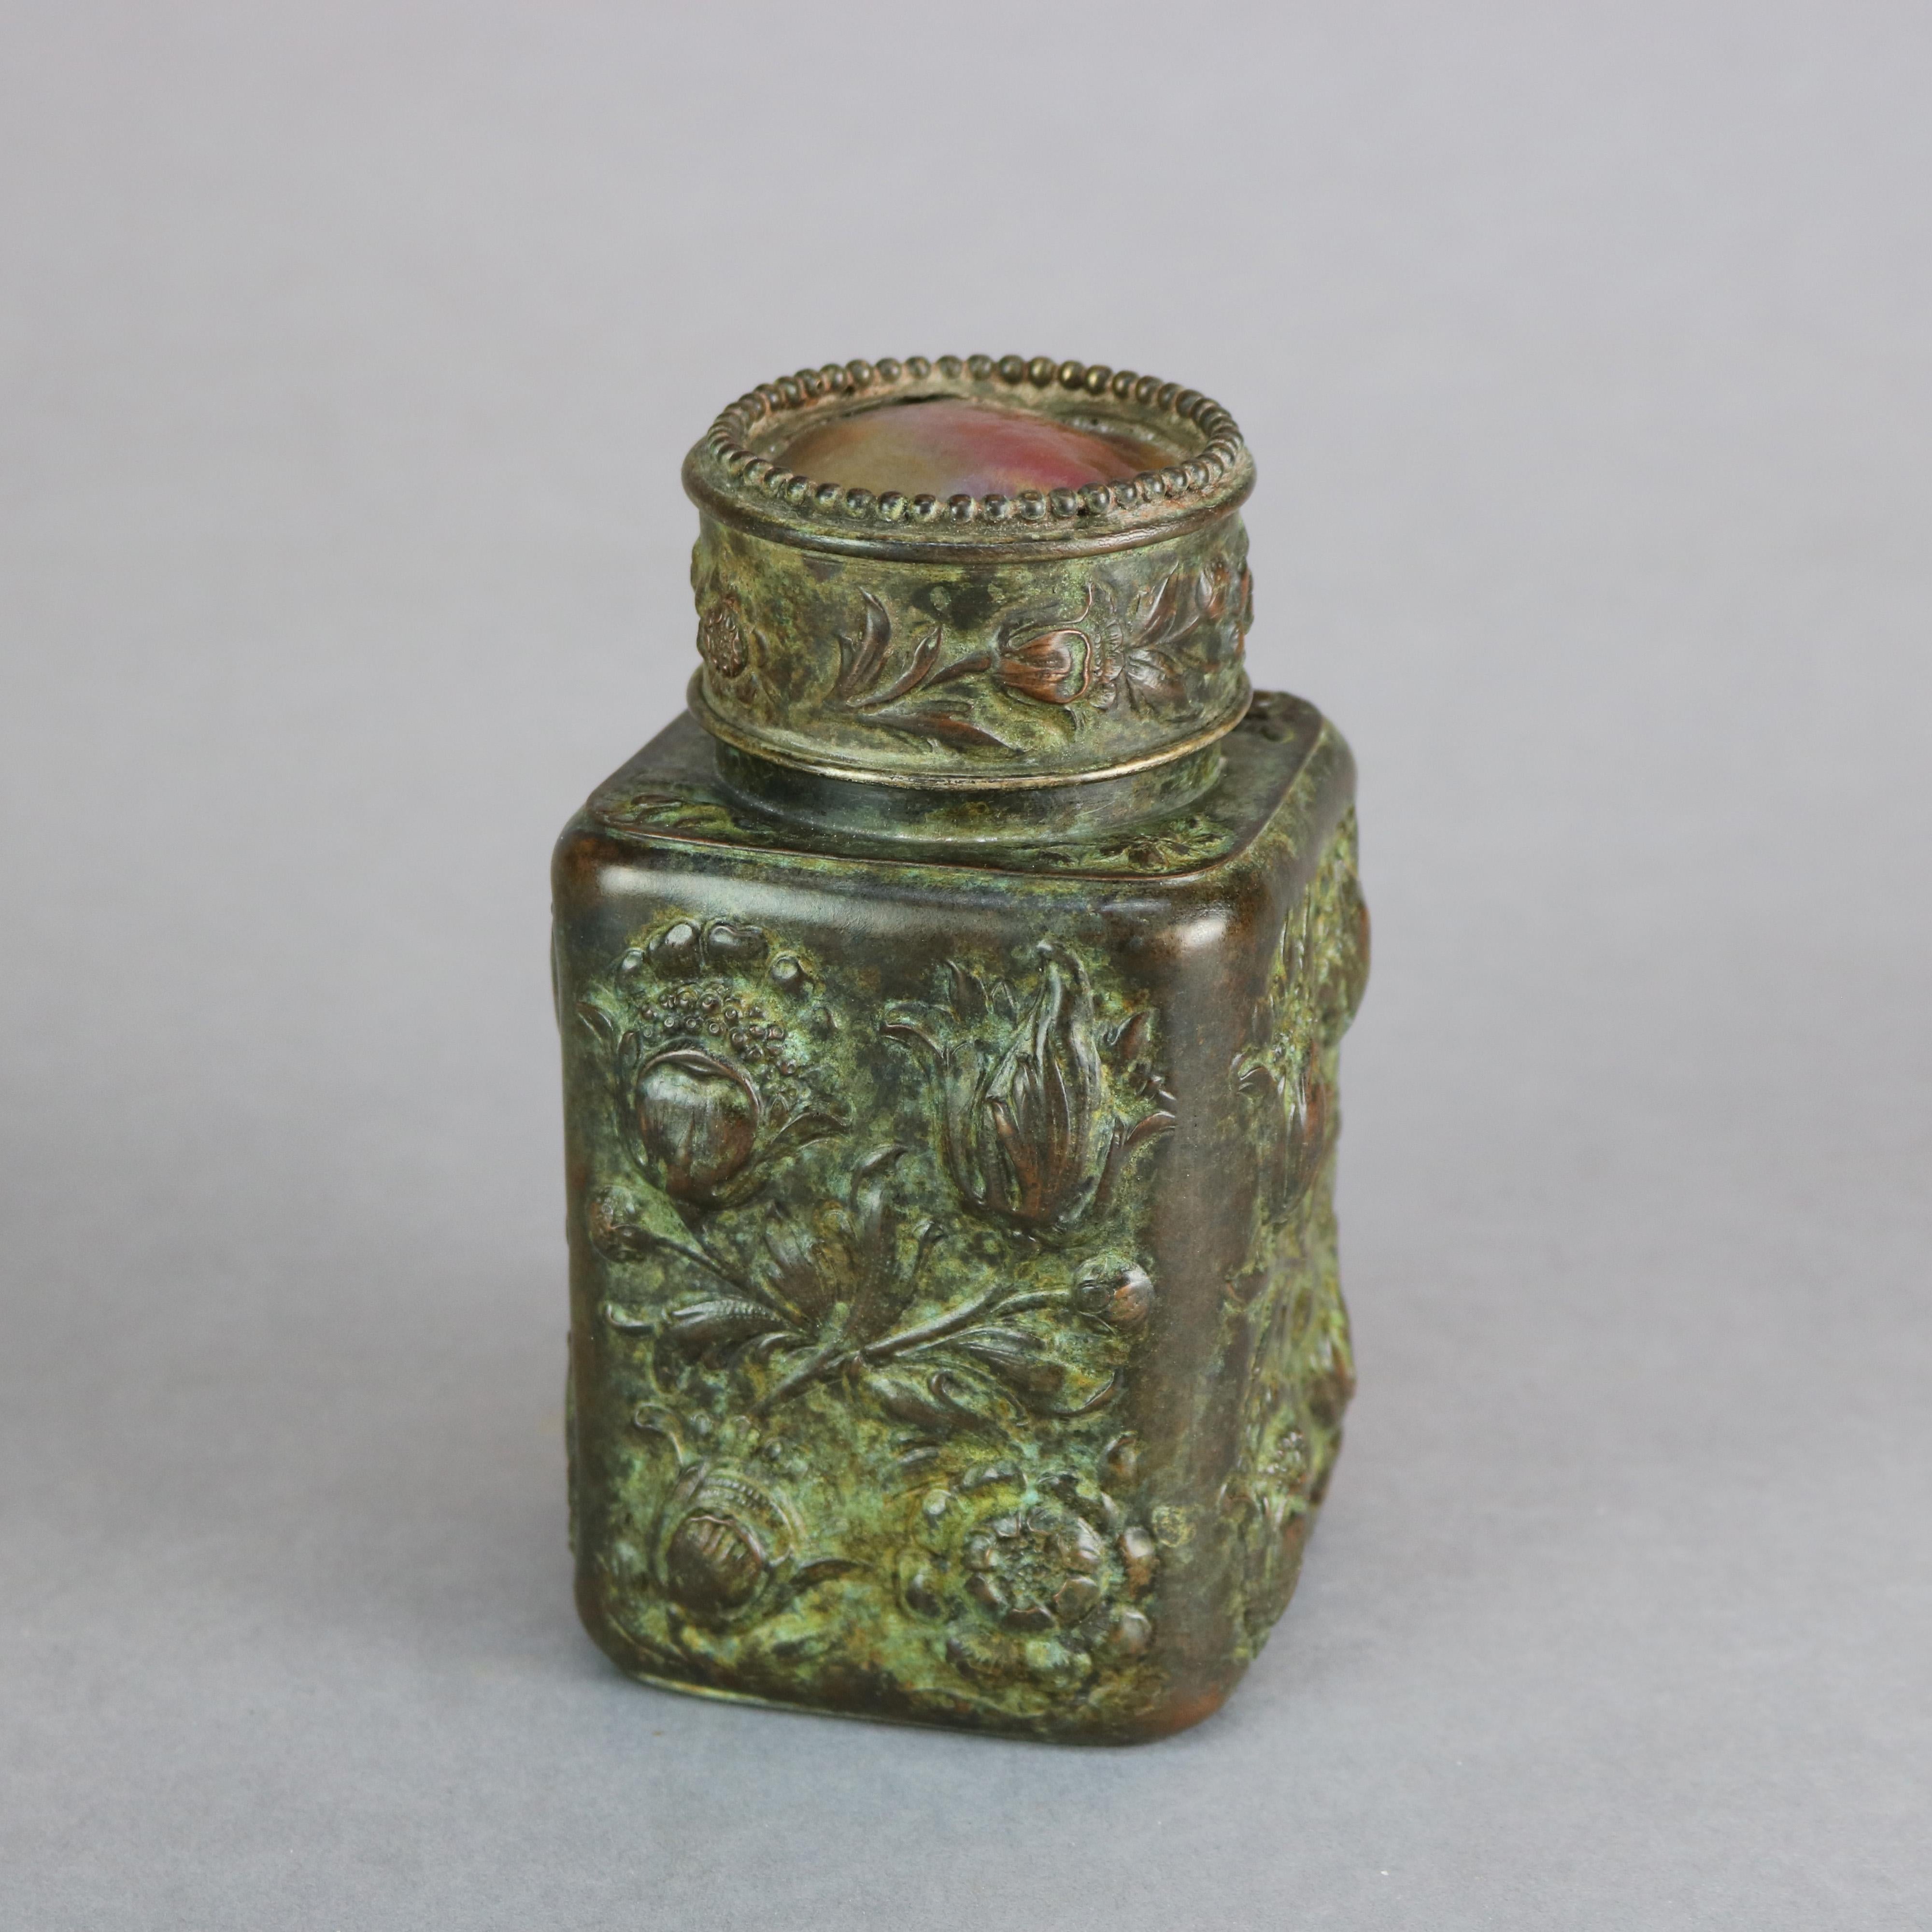 20th Century Bronze Repousse & Art Glass Tobacco Jar After Tiffany, 20th C